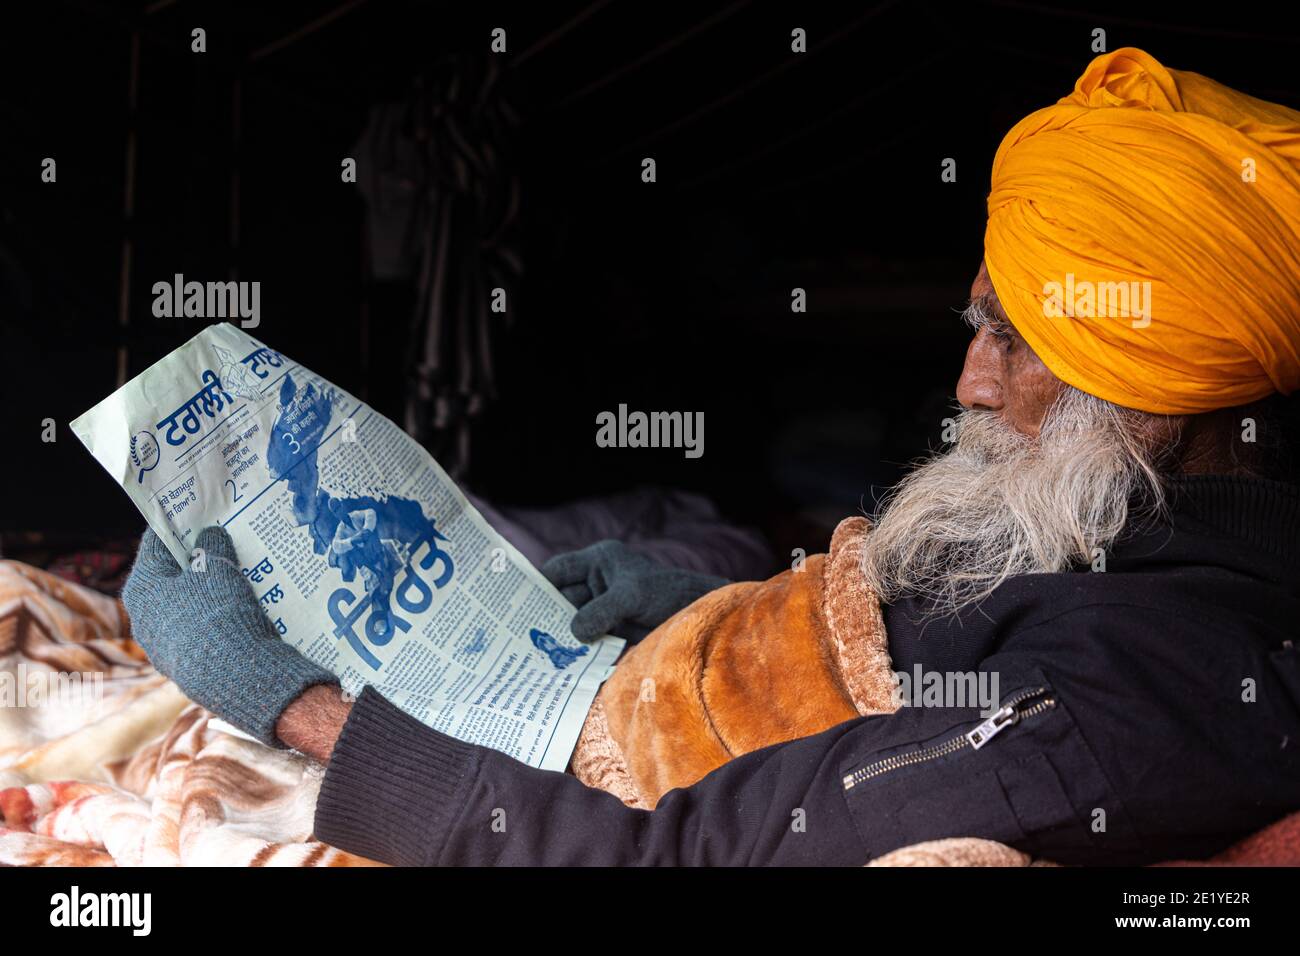 A PORTRAIT OF A FARMER PROTESTER READING NEWS PAPER AT DELHI BORDER , THEY ARE PROTESTING AGAINST NEW FARM LAW PASSED BY INDIAN GOVERNMENT. Stock Photo